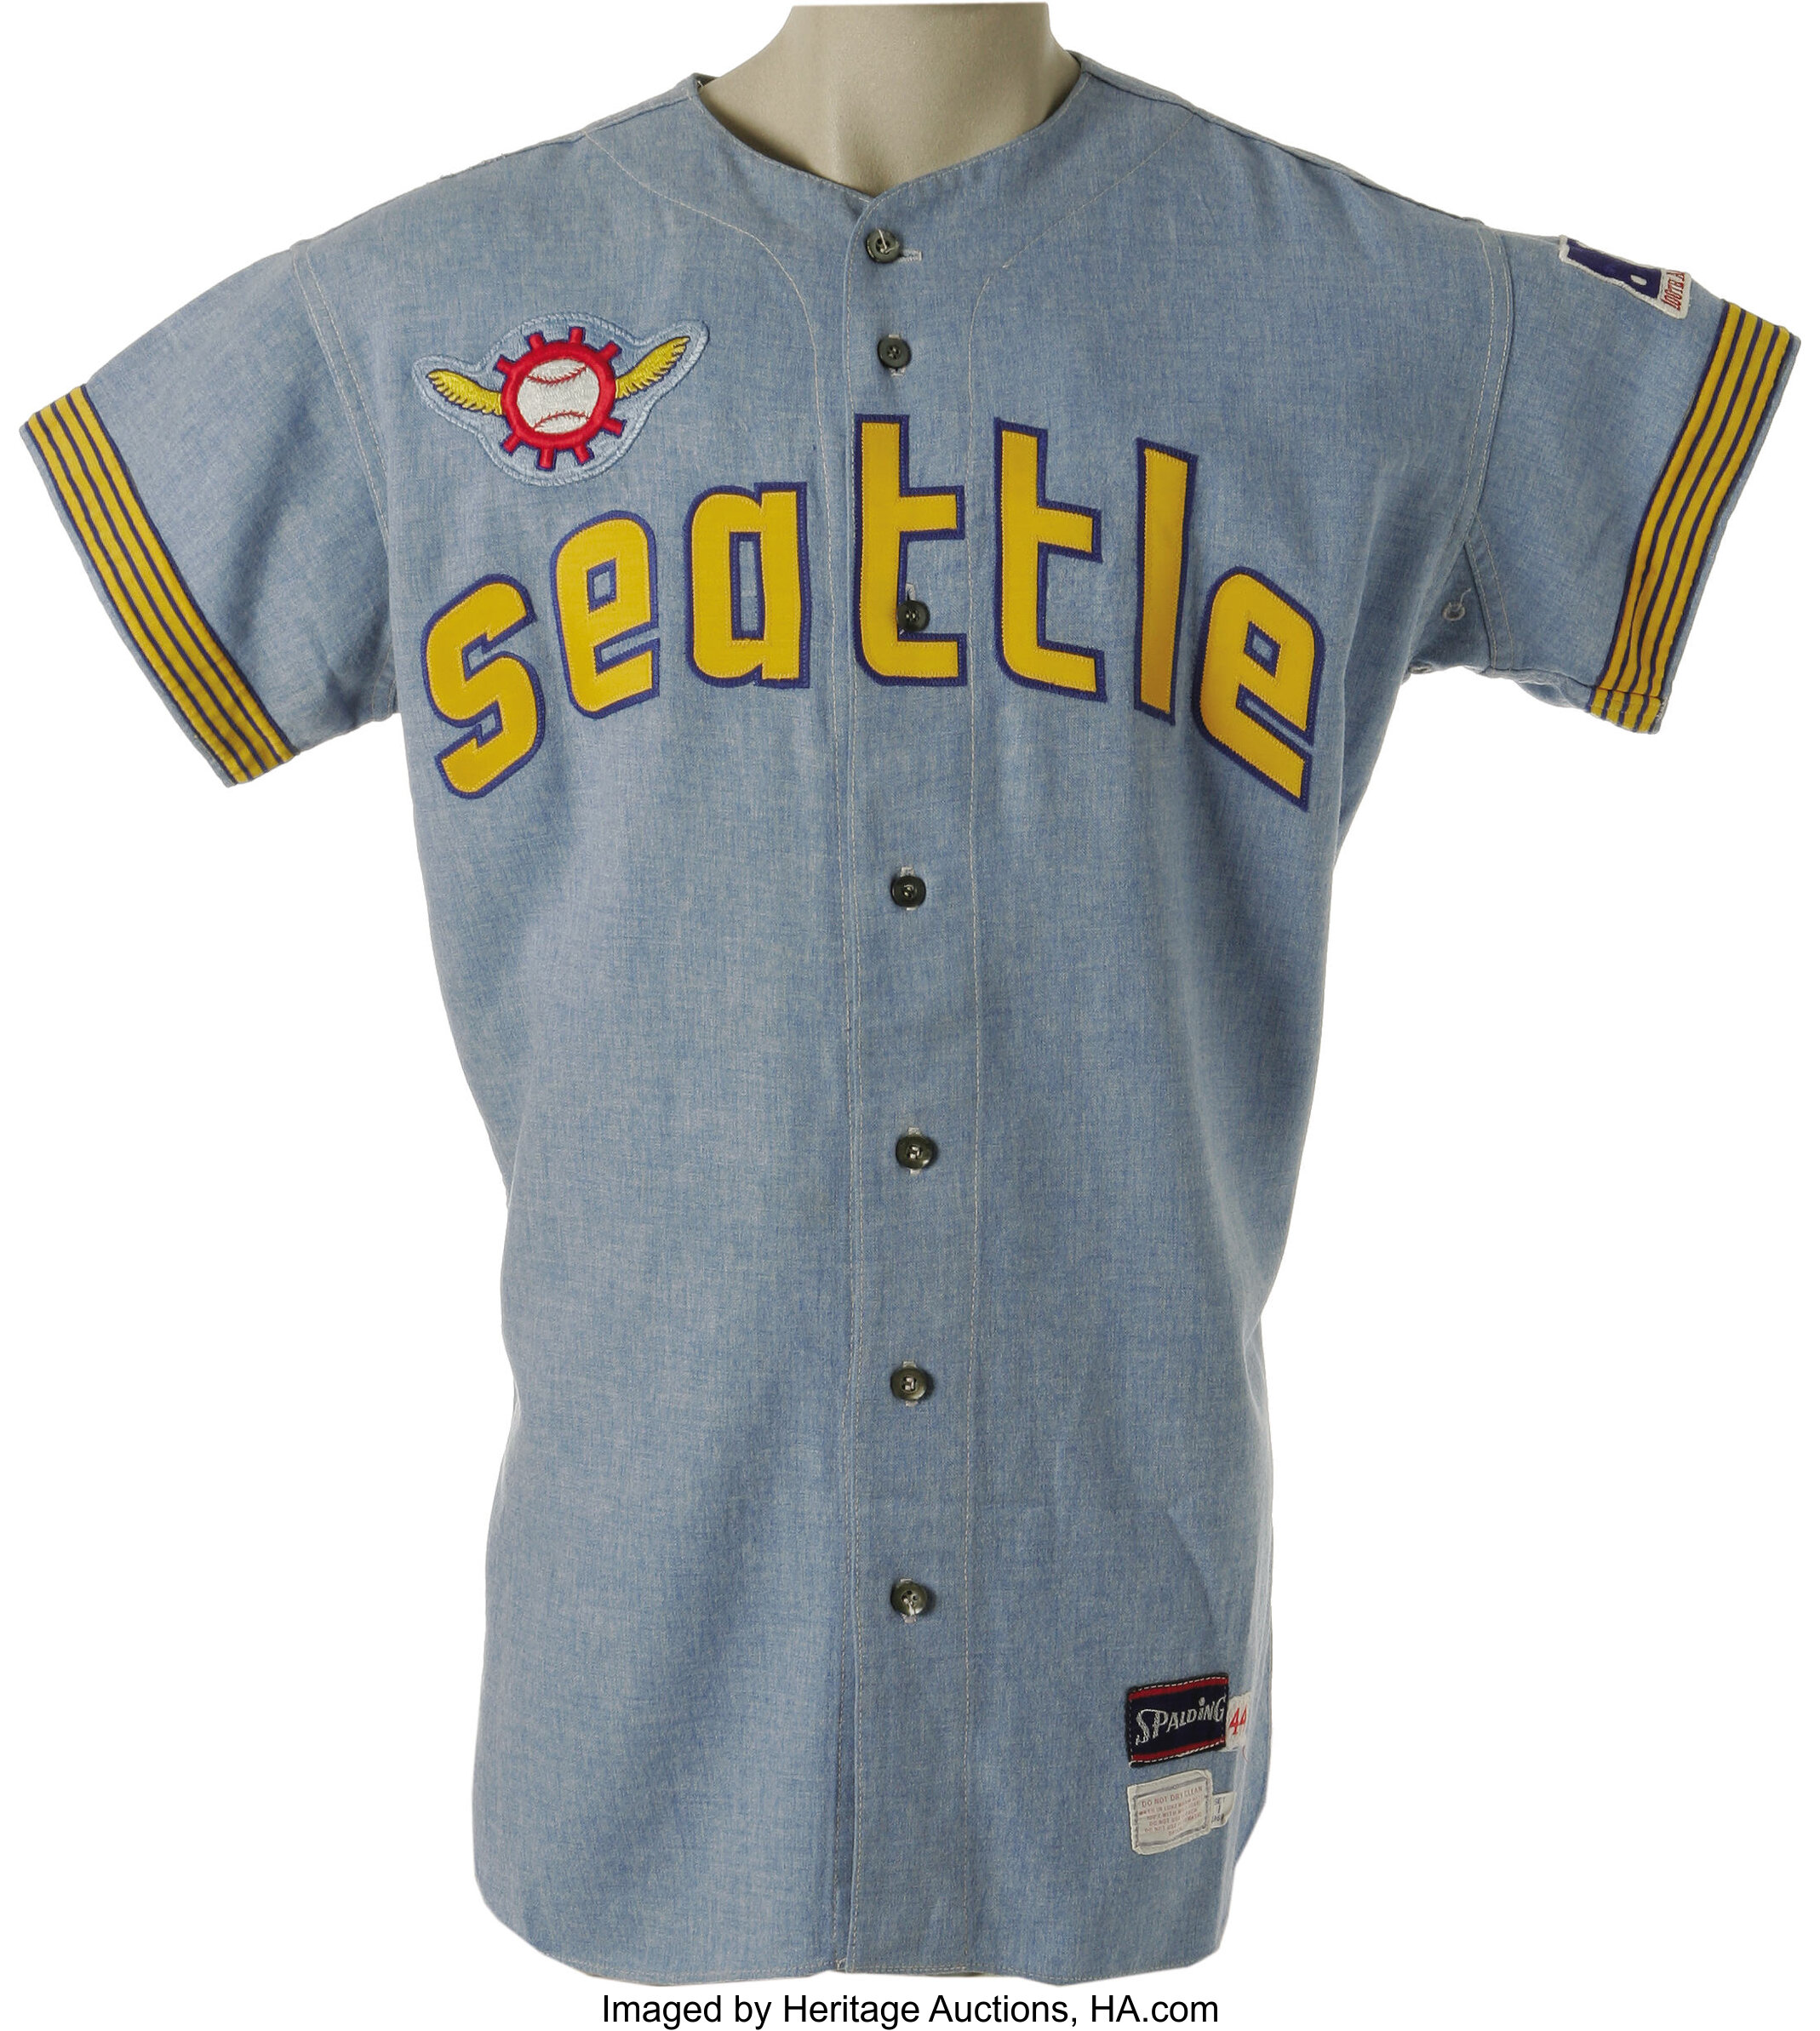 1969 Seattle Pilots Game Worn Jersey. While the Seattle Mariners